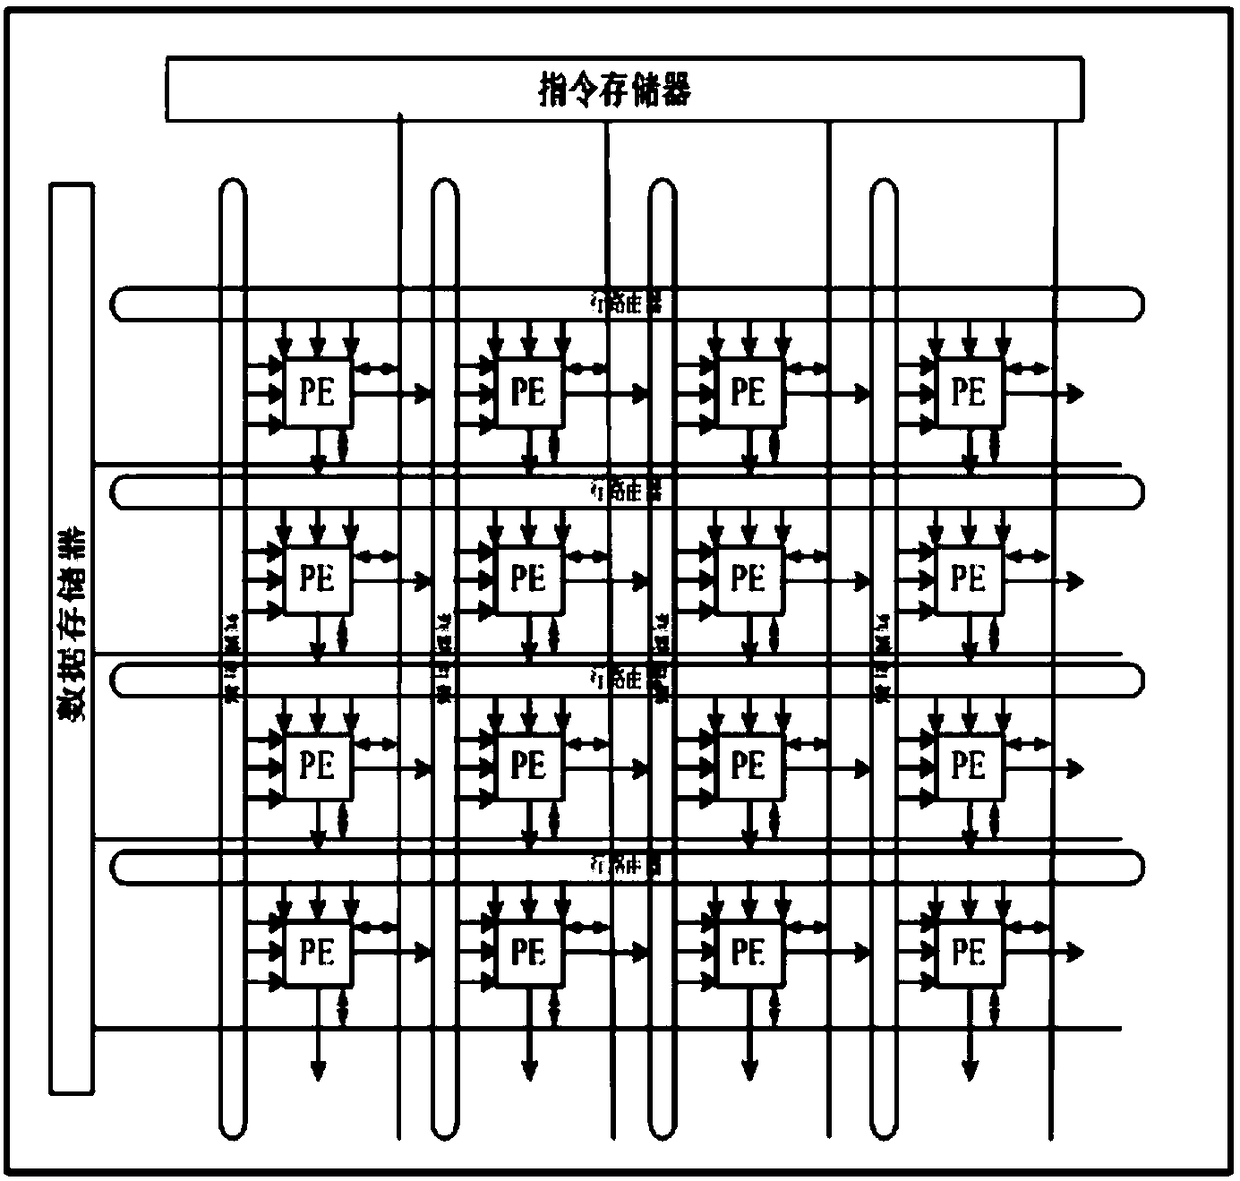 A multi-objective optimization automatic mapping scheduling method for row-column parallel coarse-grained reconfigurable arrays